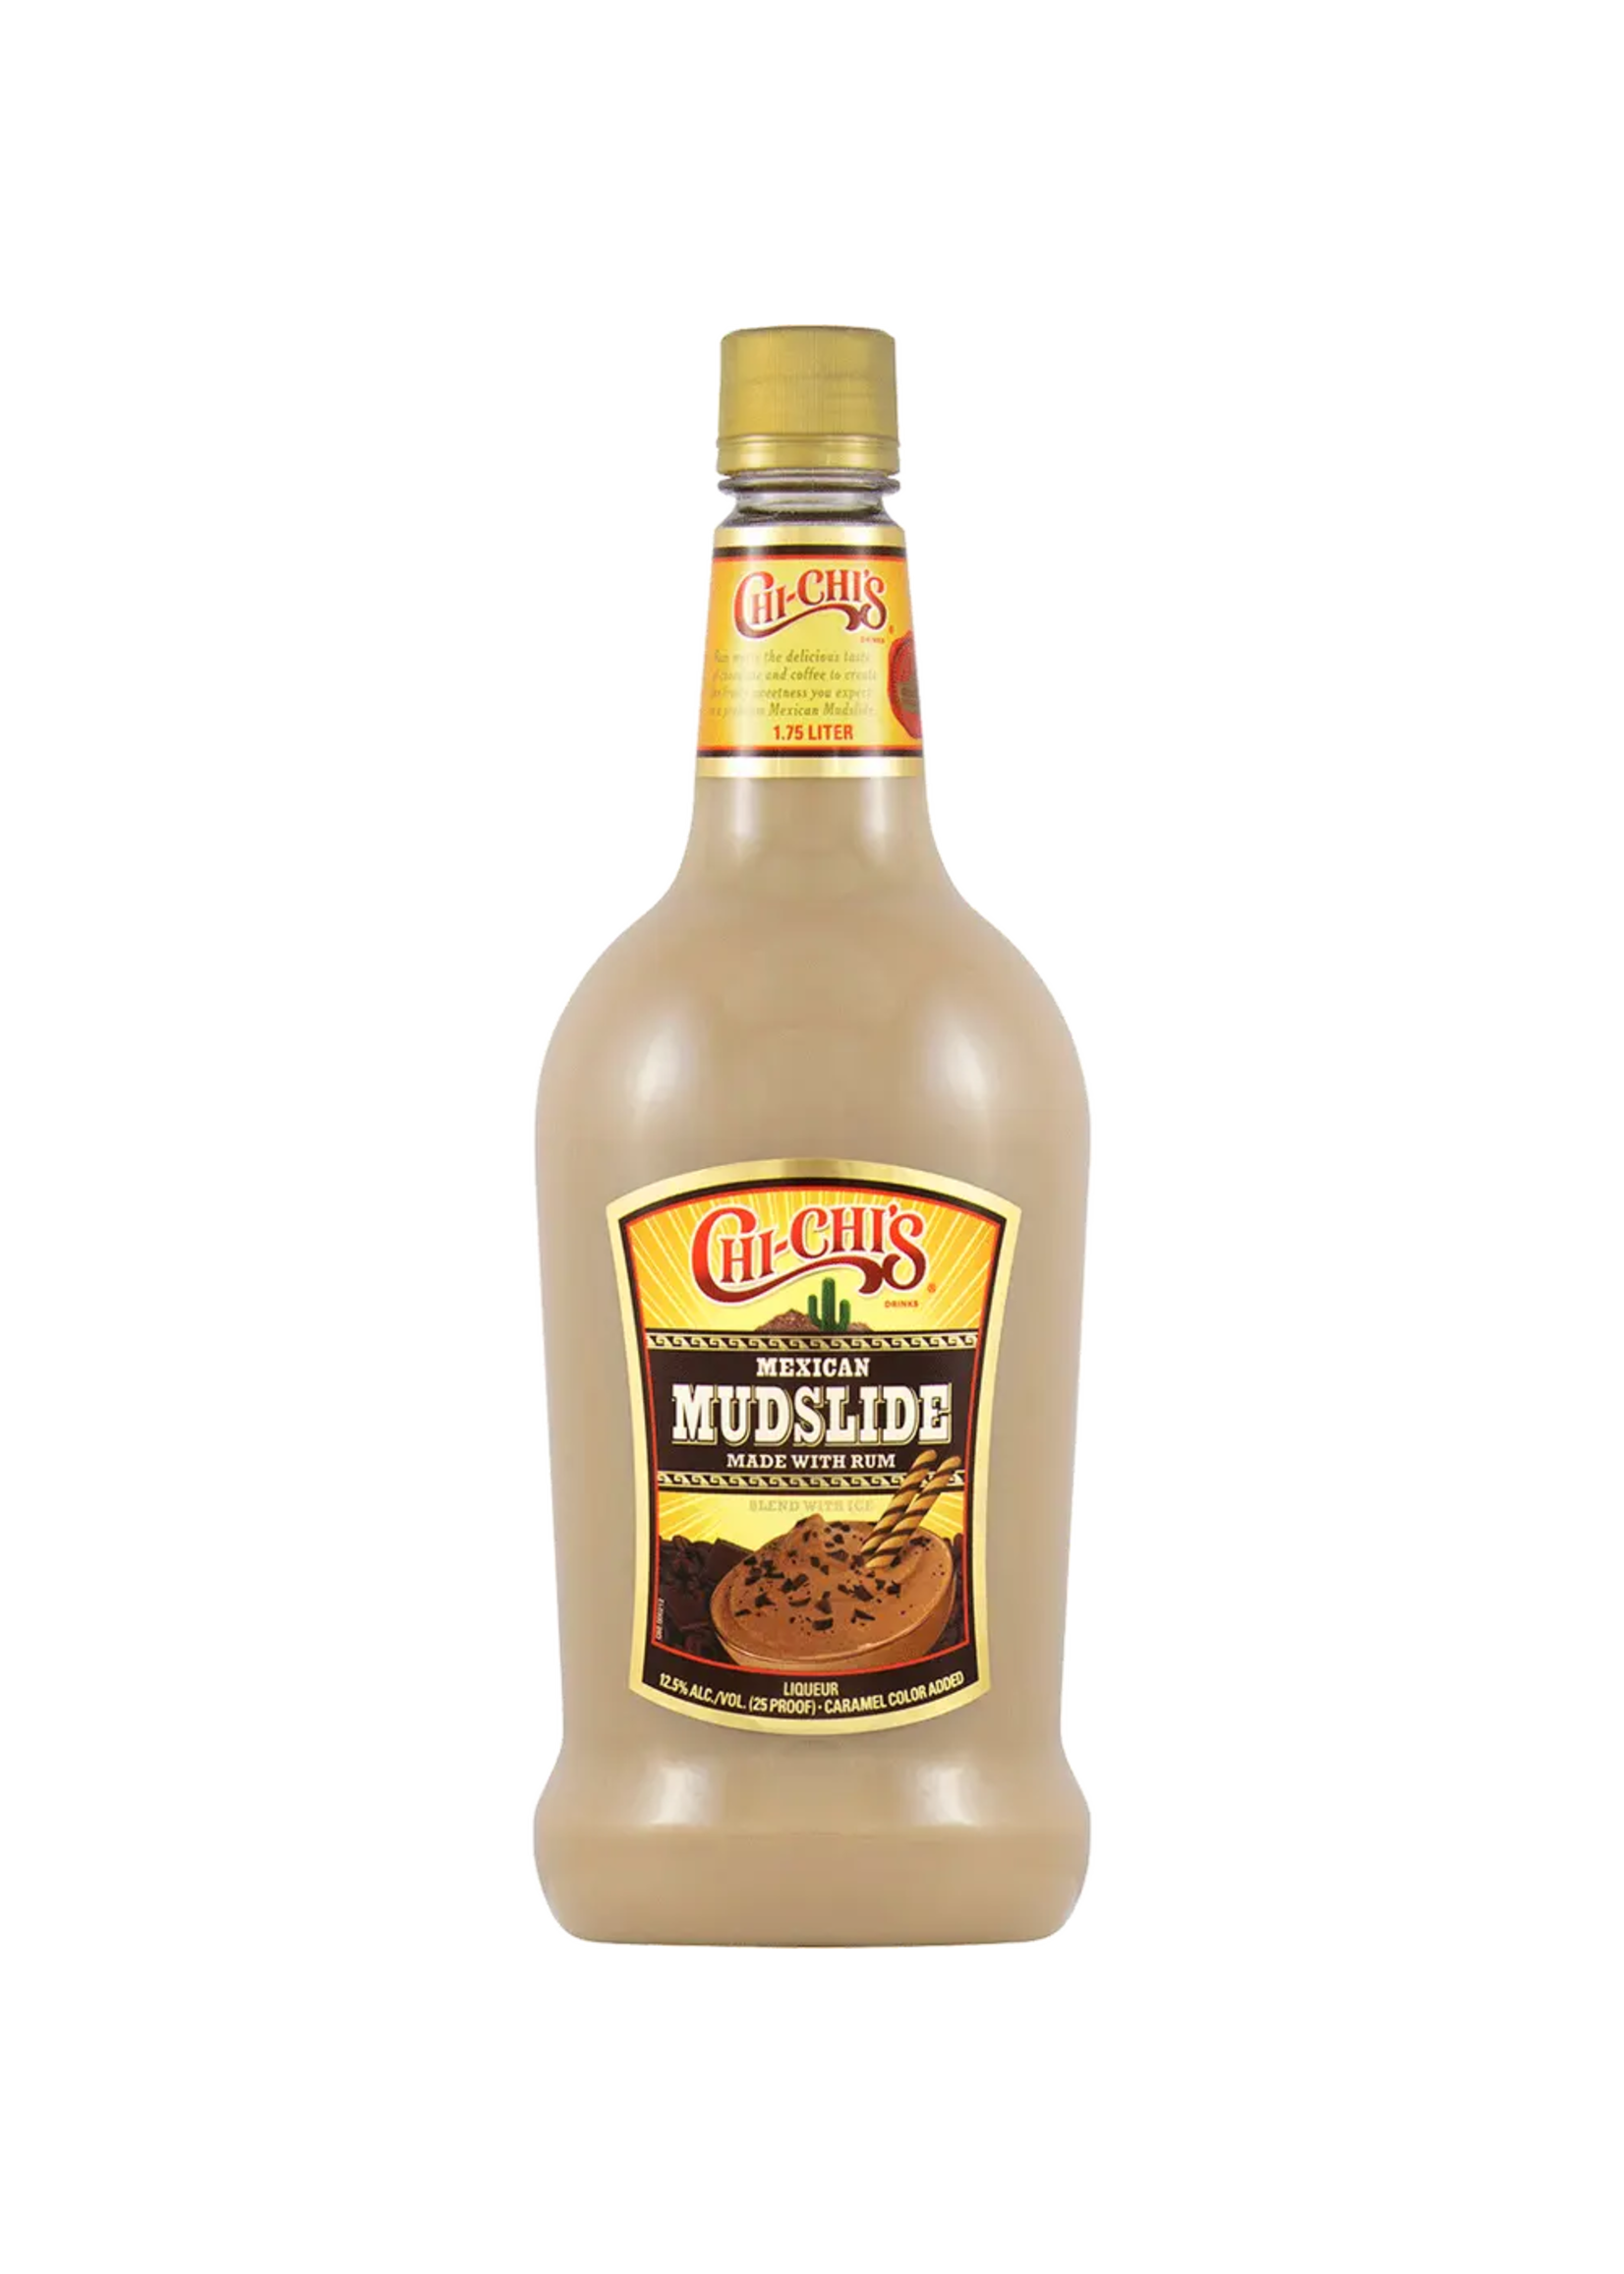 CHI CHIS MEXICAN MUDSLIDE 25PF PET 1.75 LTR